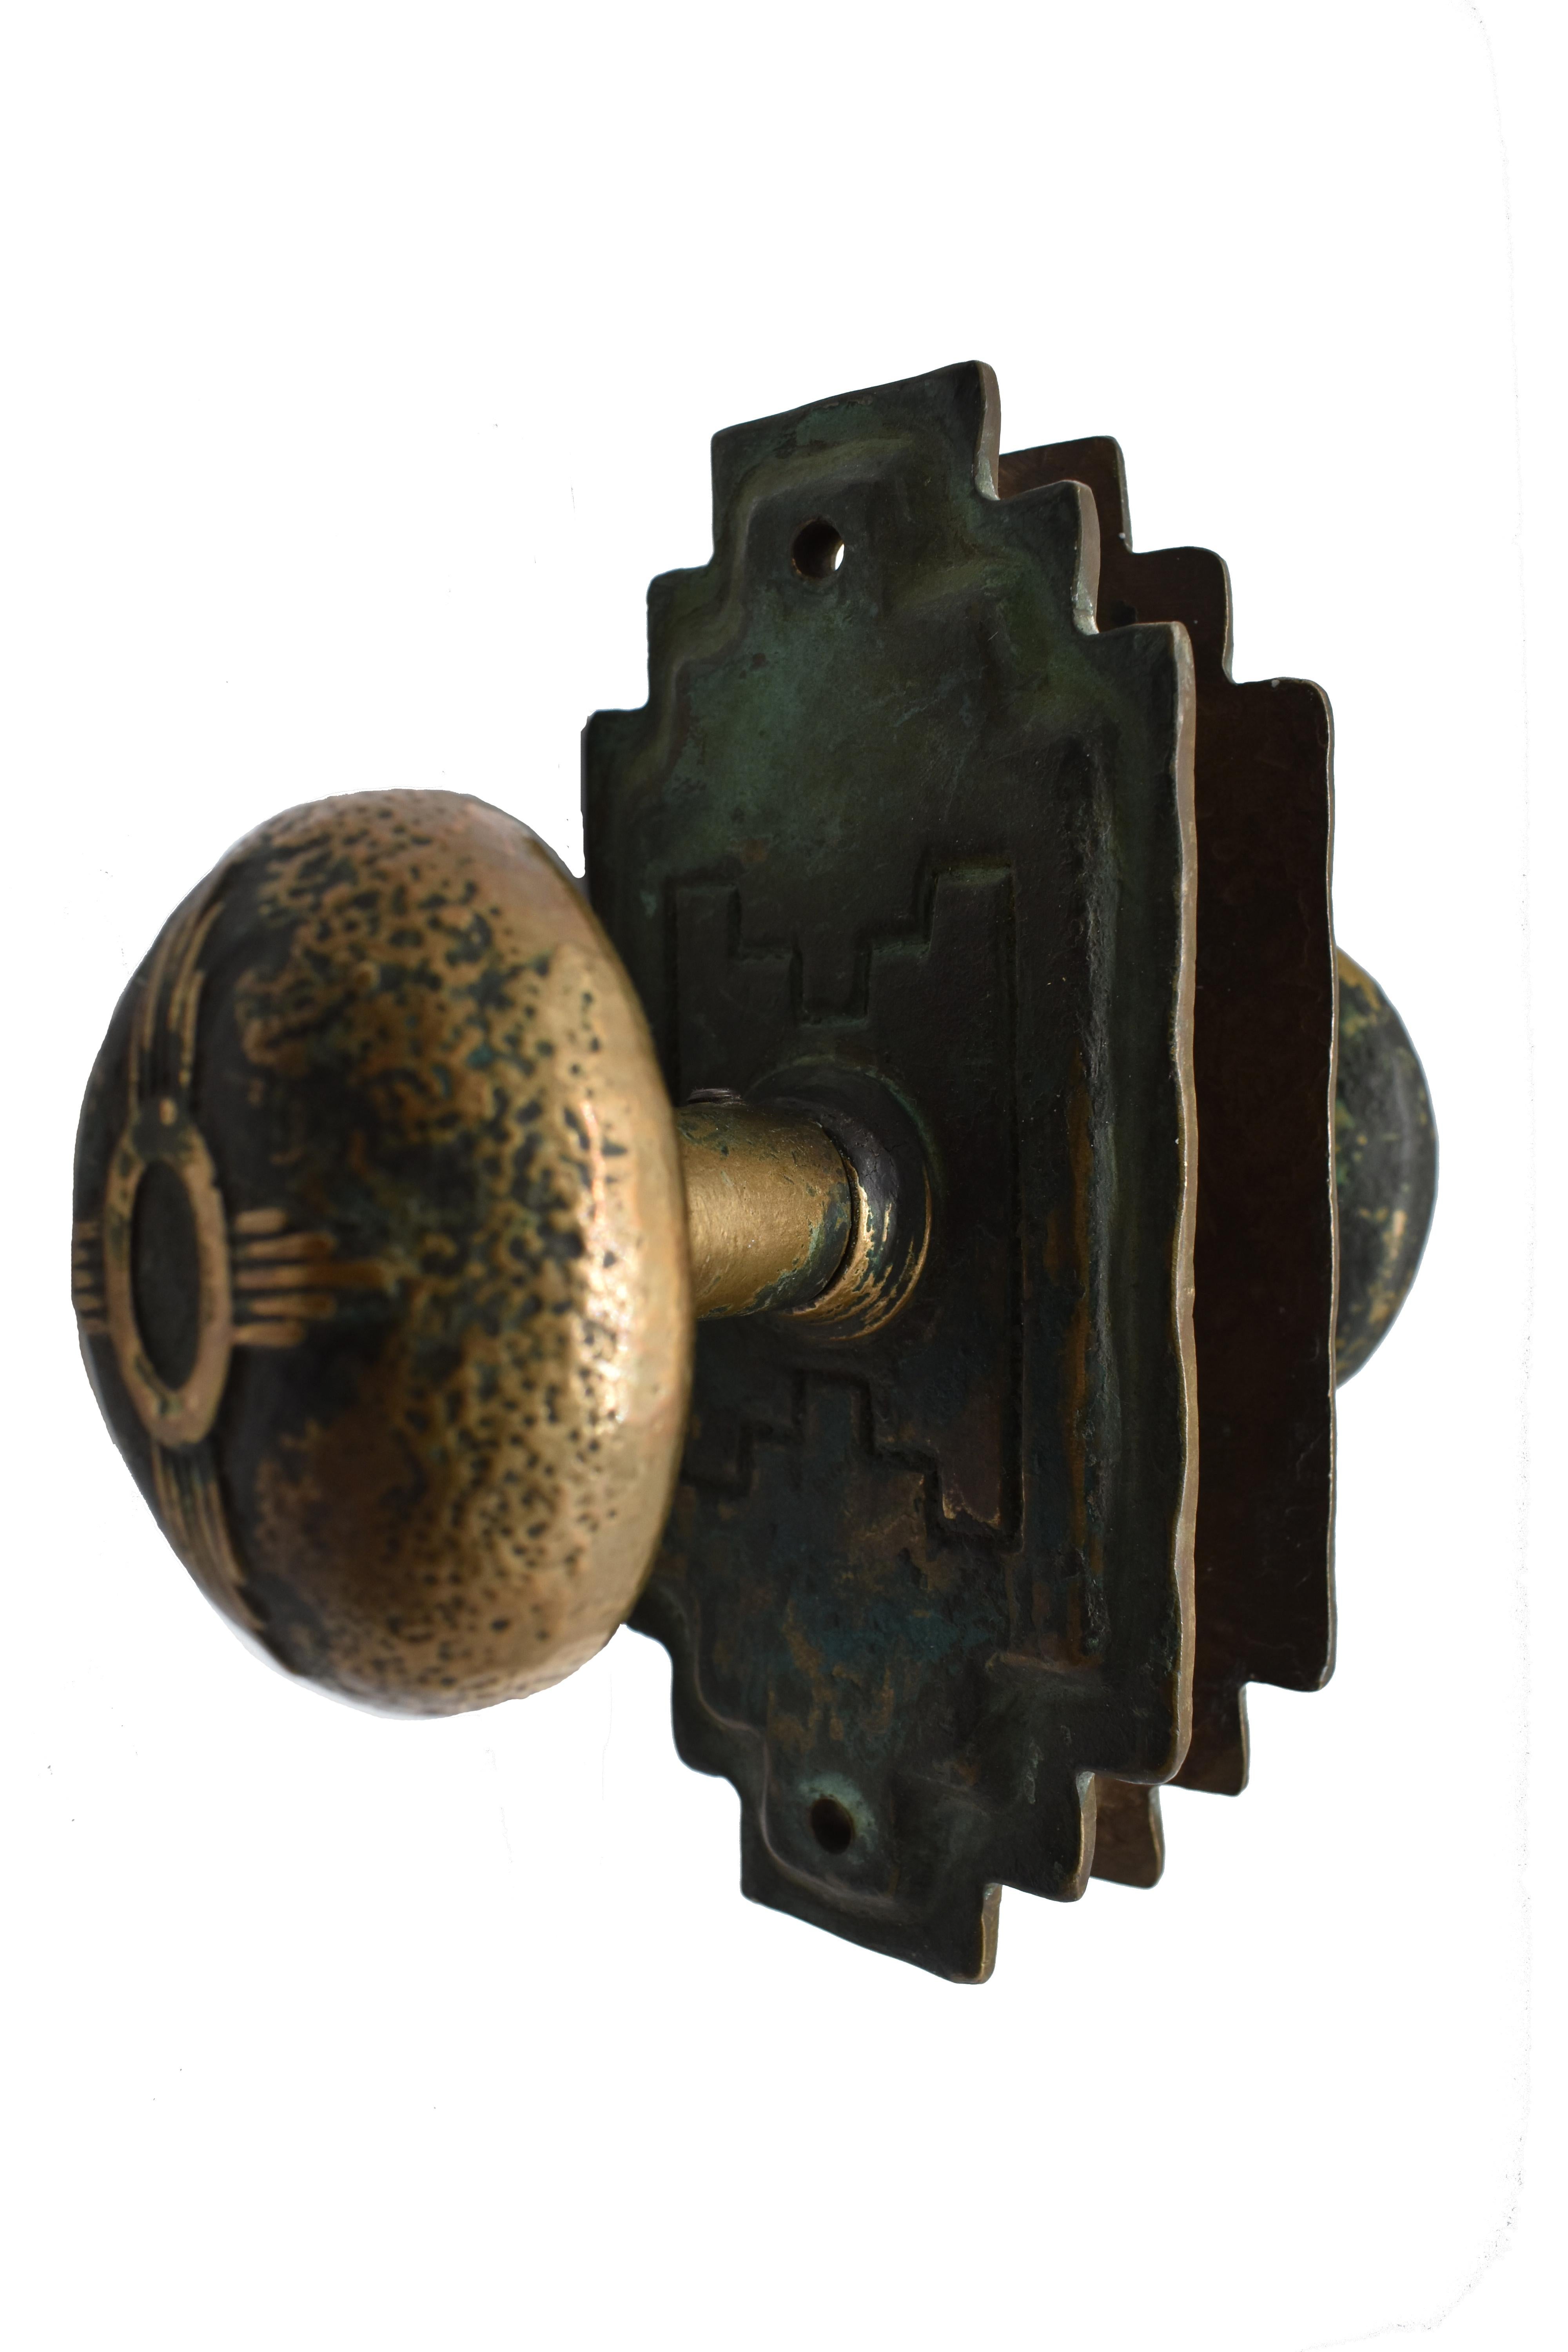 1970s cast bronze door Southwestern-style door set includes two knobs, two rosettes, spindle and set screws.